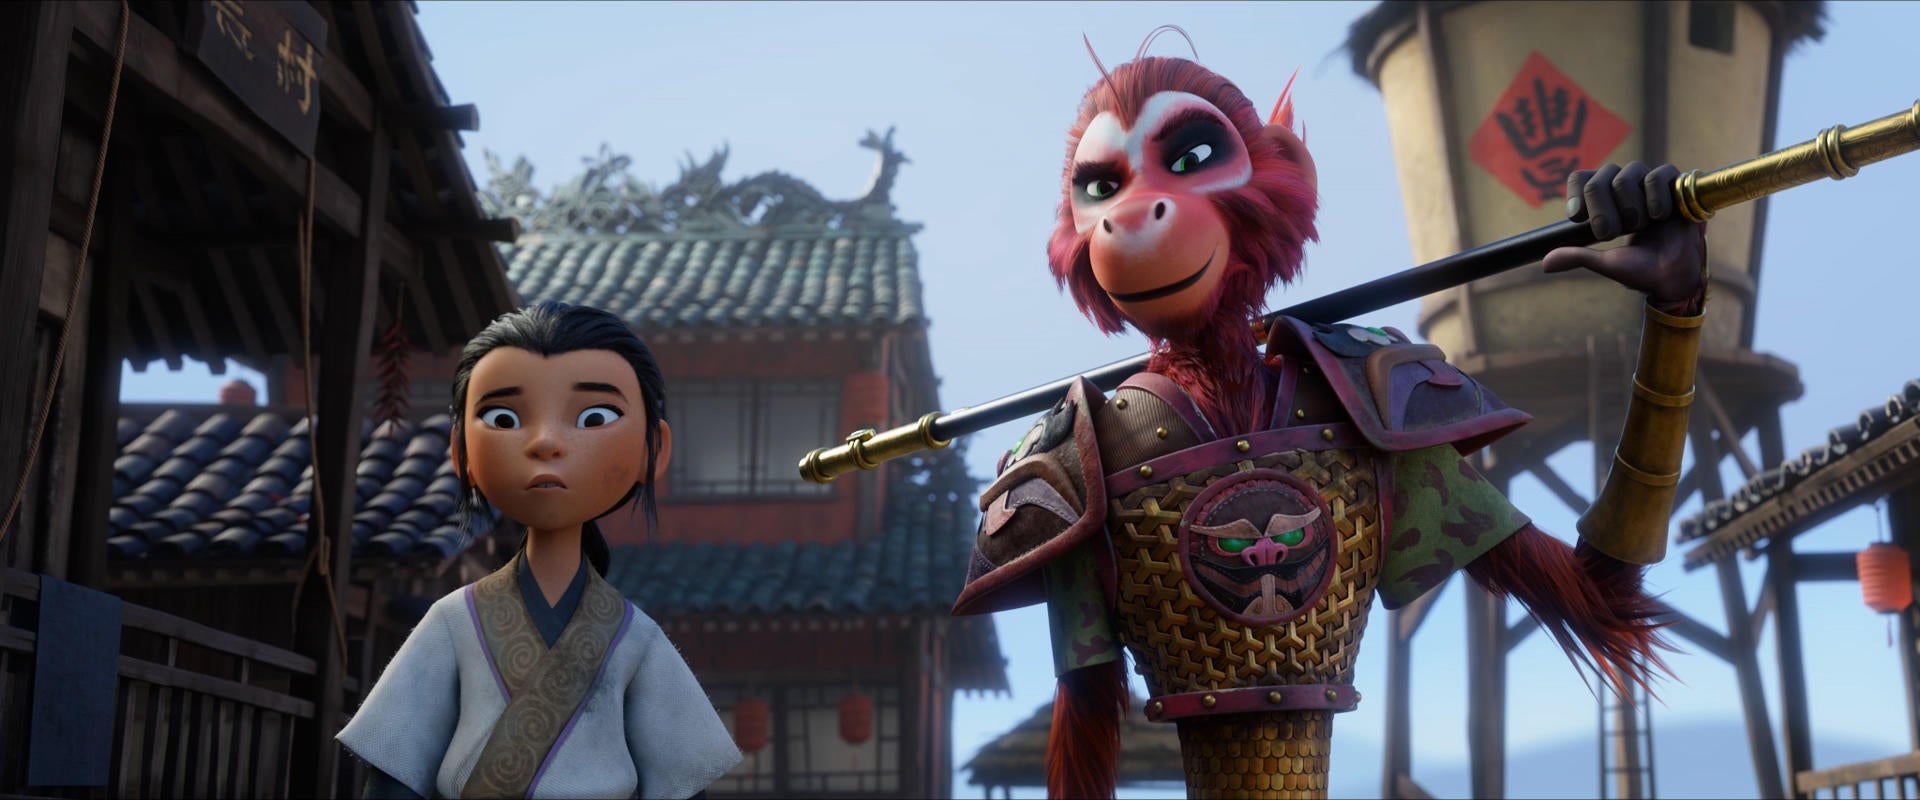 Netflix Slates 3 New Animated Projects from Asian-American